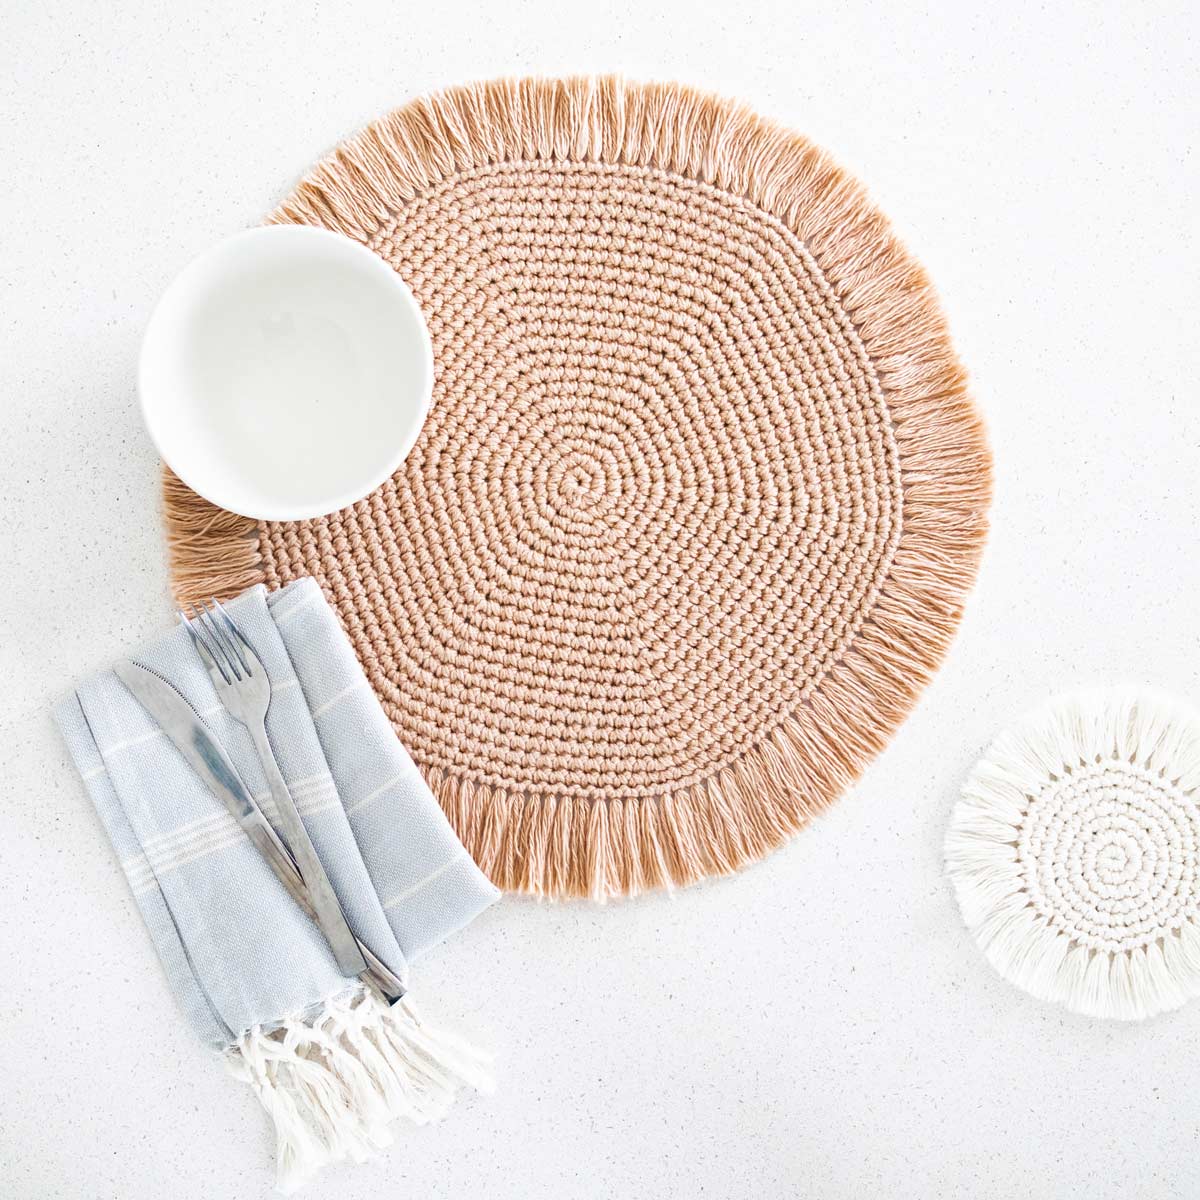 How To Crochet A Placemat